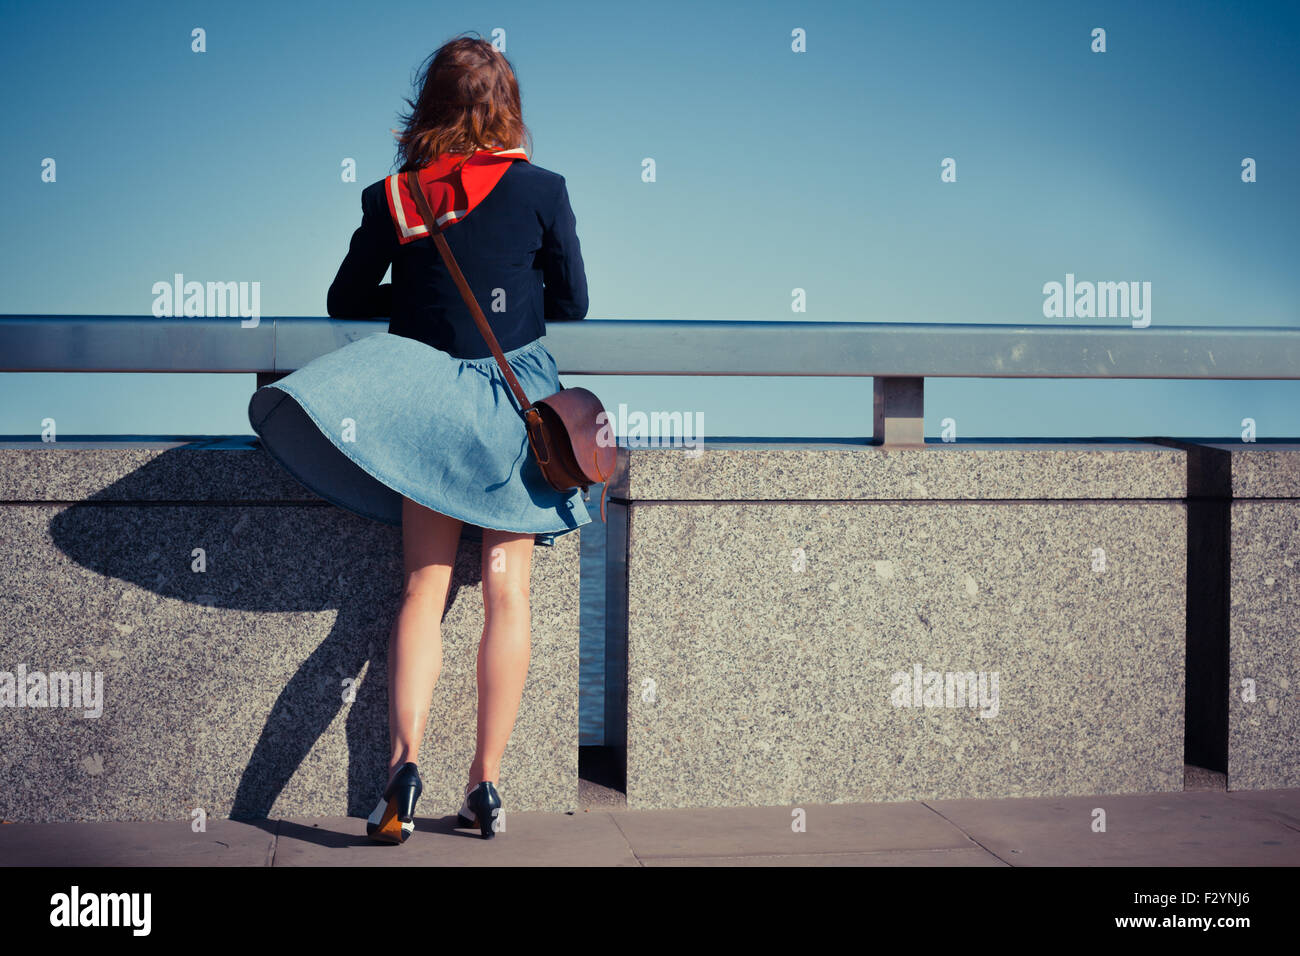 A young woman is standing on a bridge with her skirt blowing in the wind Stock Photo